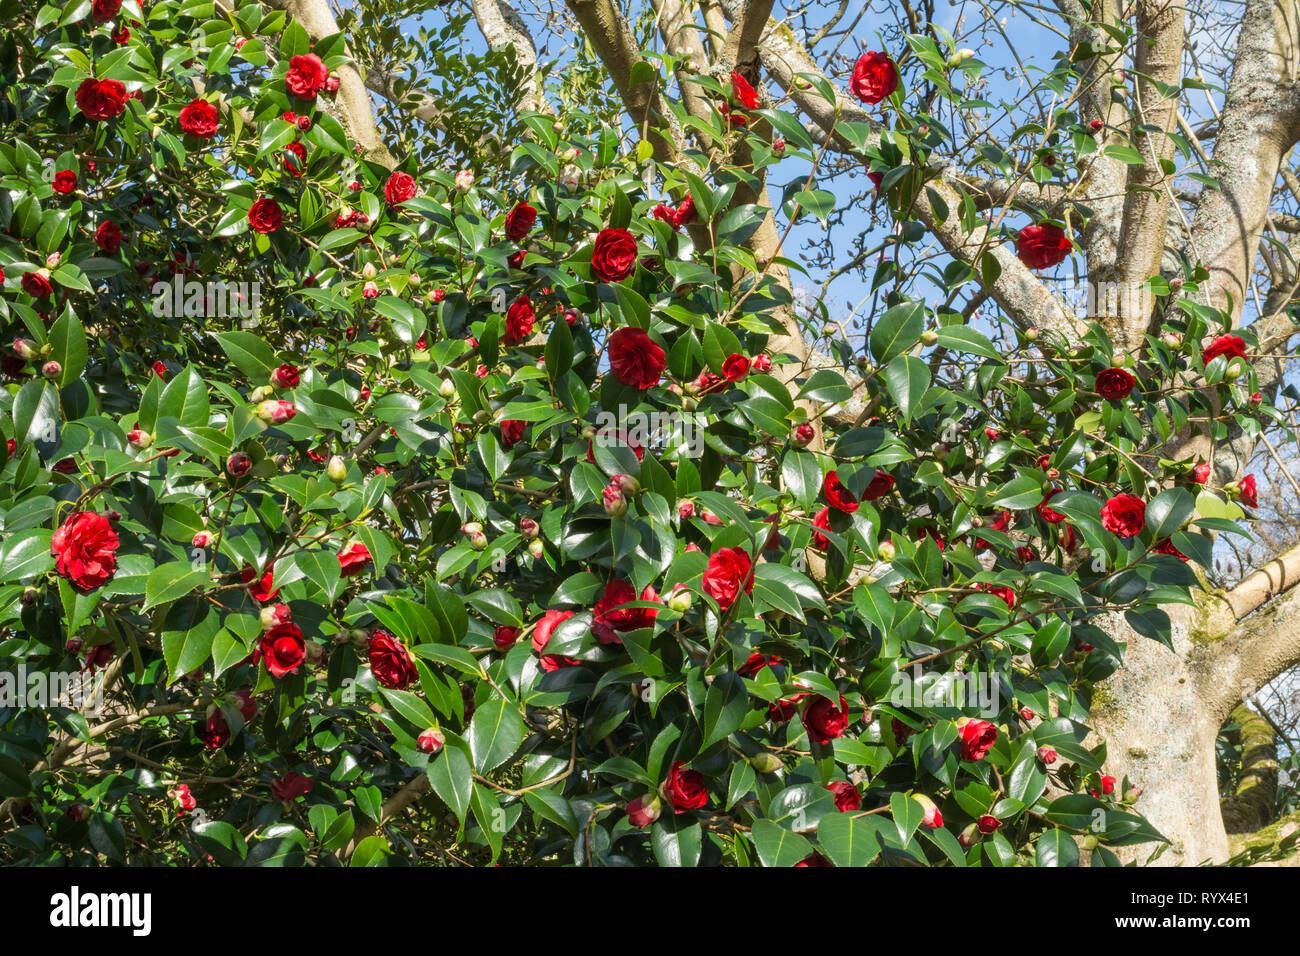 Camellia japonica 'konronkoku' with red blooms or flowers during march, early spring, in an English garden, UK Stock Photo